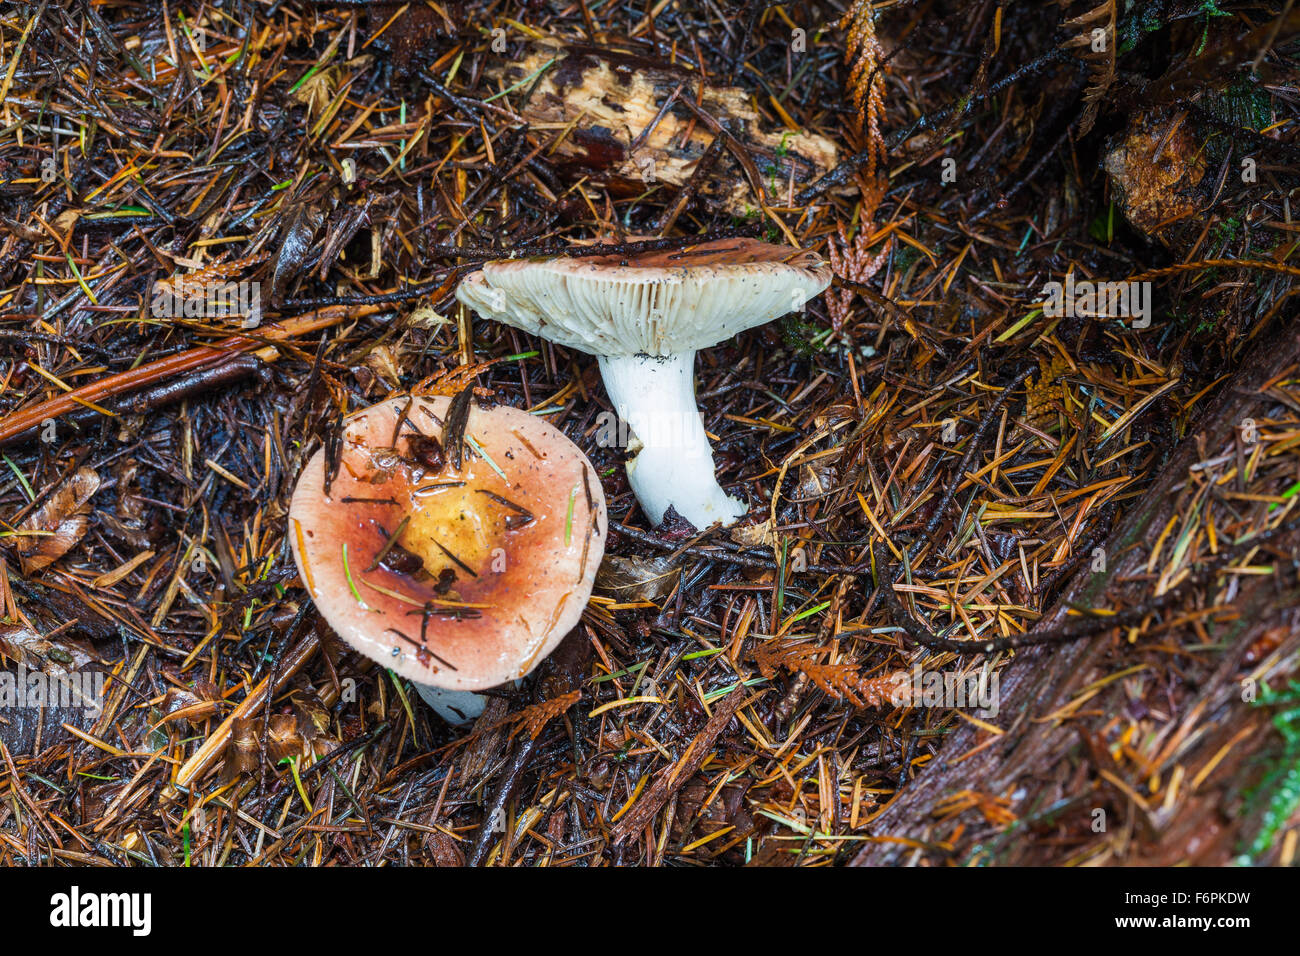 Poisonous mushrooms in a temperate rain forest Stock Photo